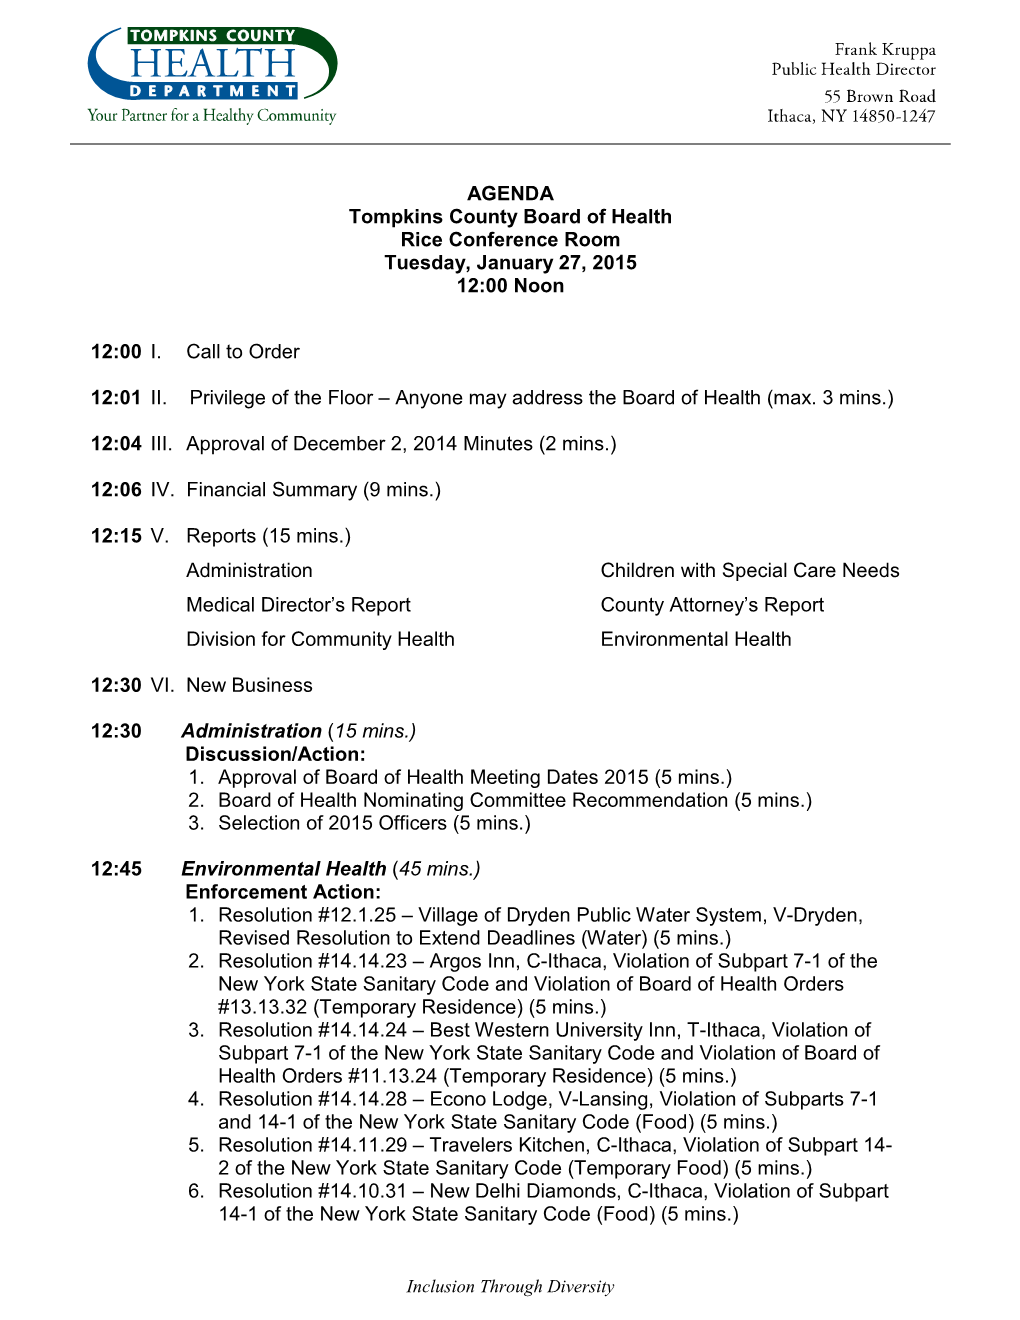 AGENDA Tompkins County Board of Health Rice Conference Room Tuesday, January 27, 2015 12:00 Noon